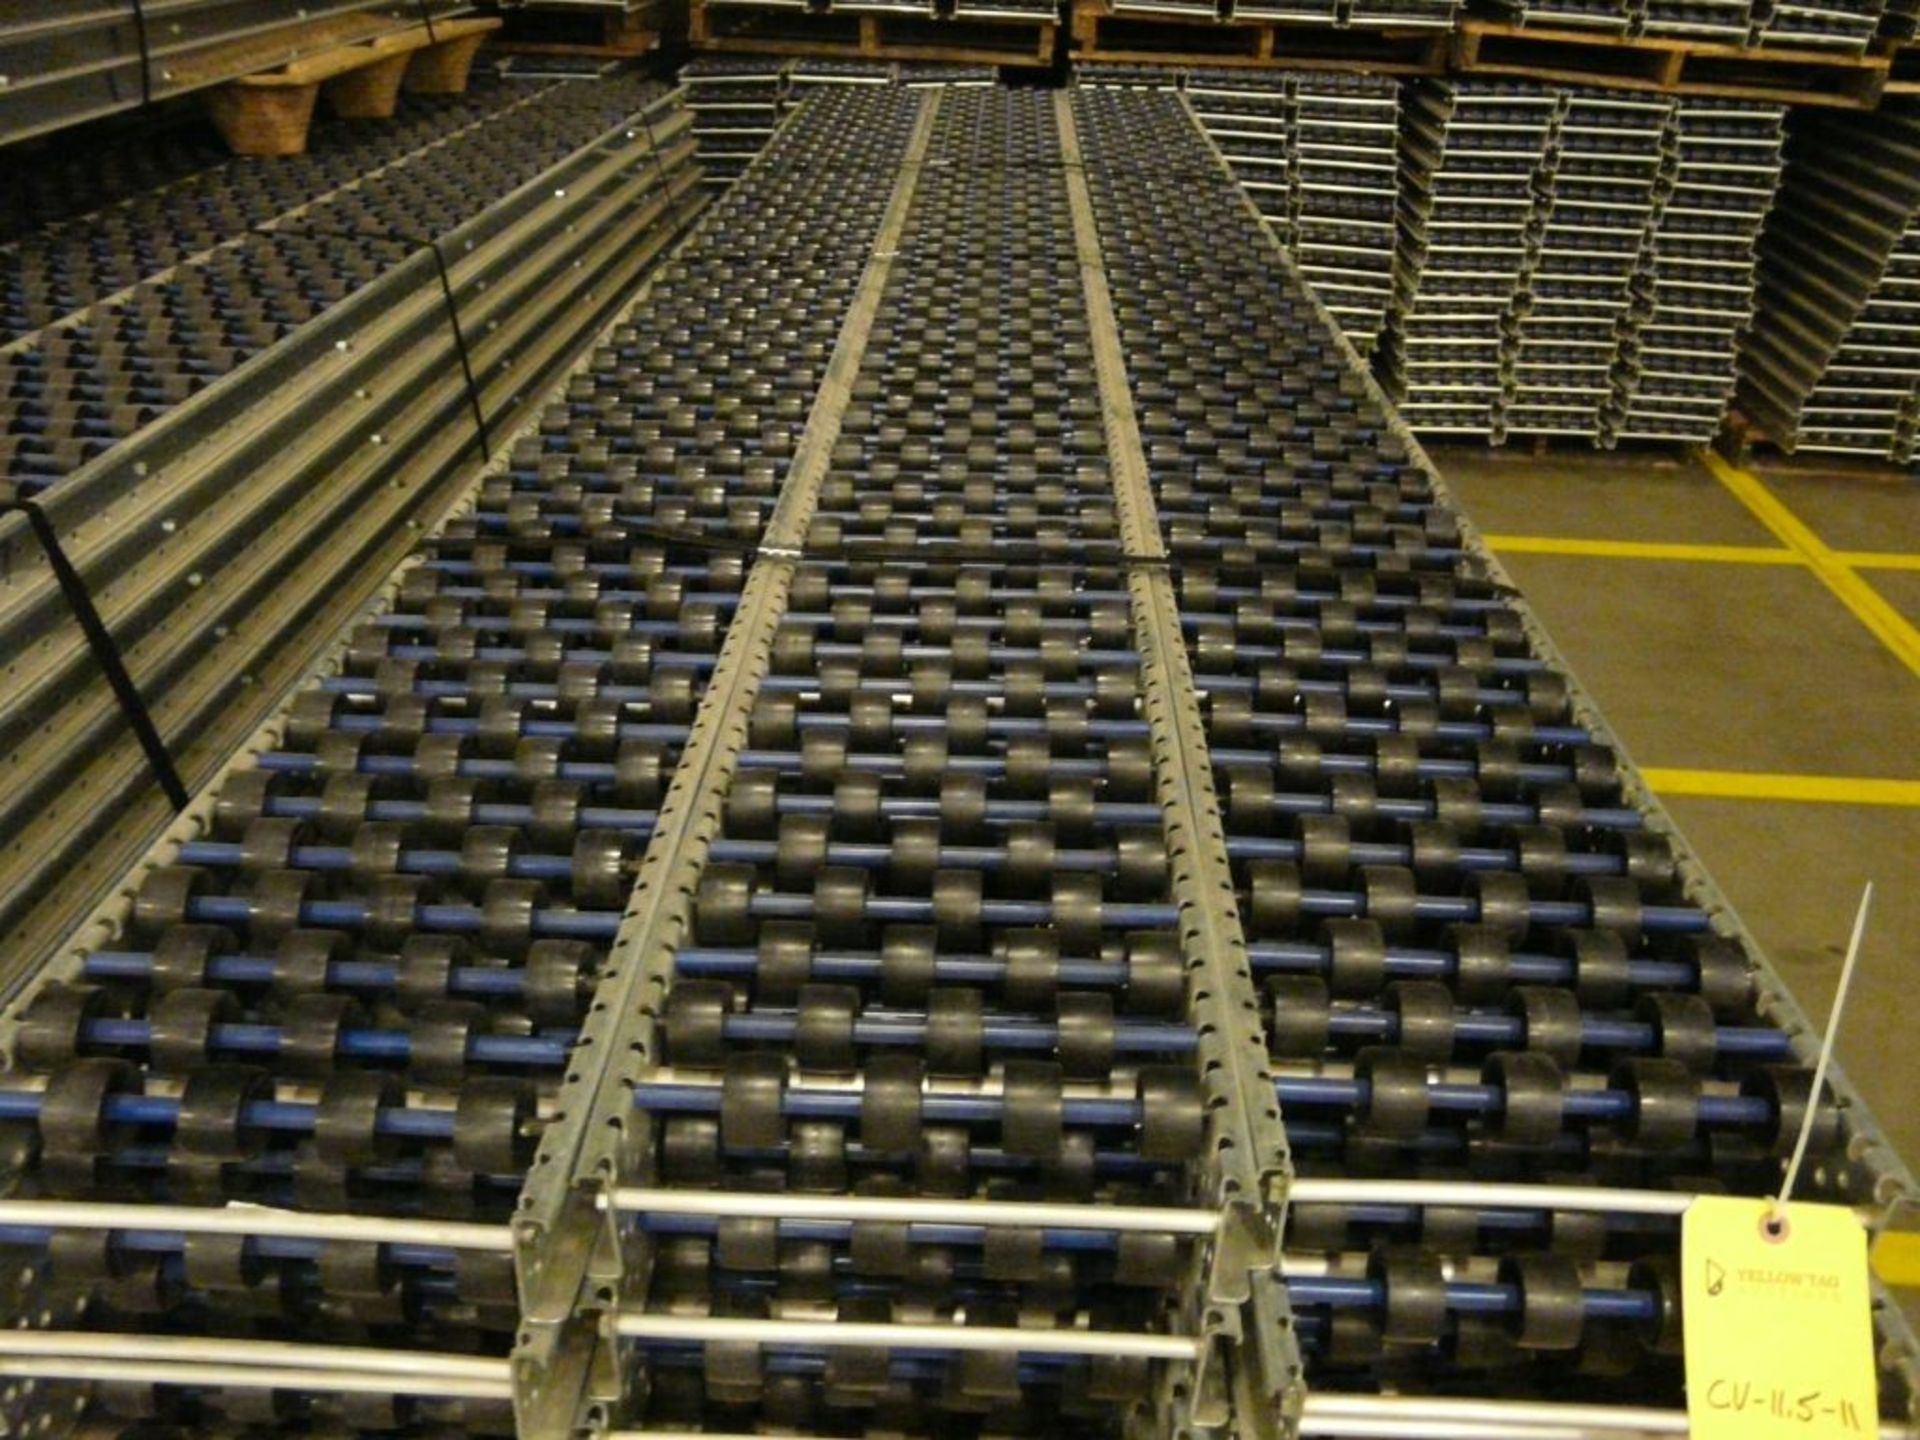 Lot of (90) SpanTrack Wheelbed Carton Flow Conveyors - 11.5'L x 11"W; Tag: 223612 - $30 Lot - Image 3 of 4